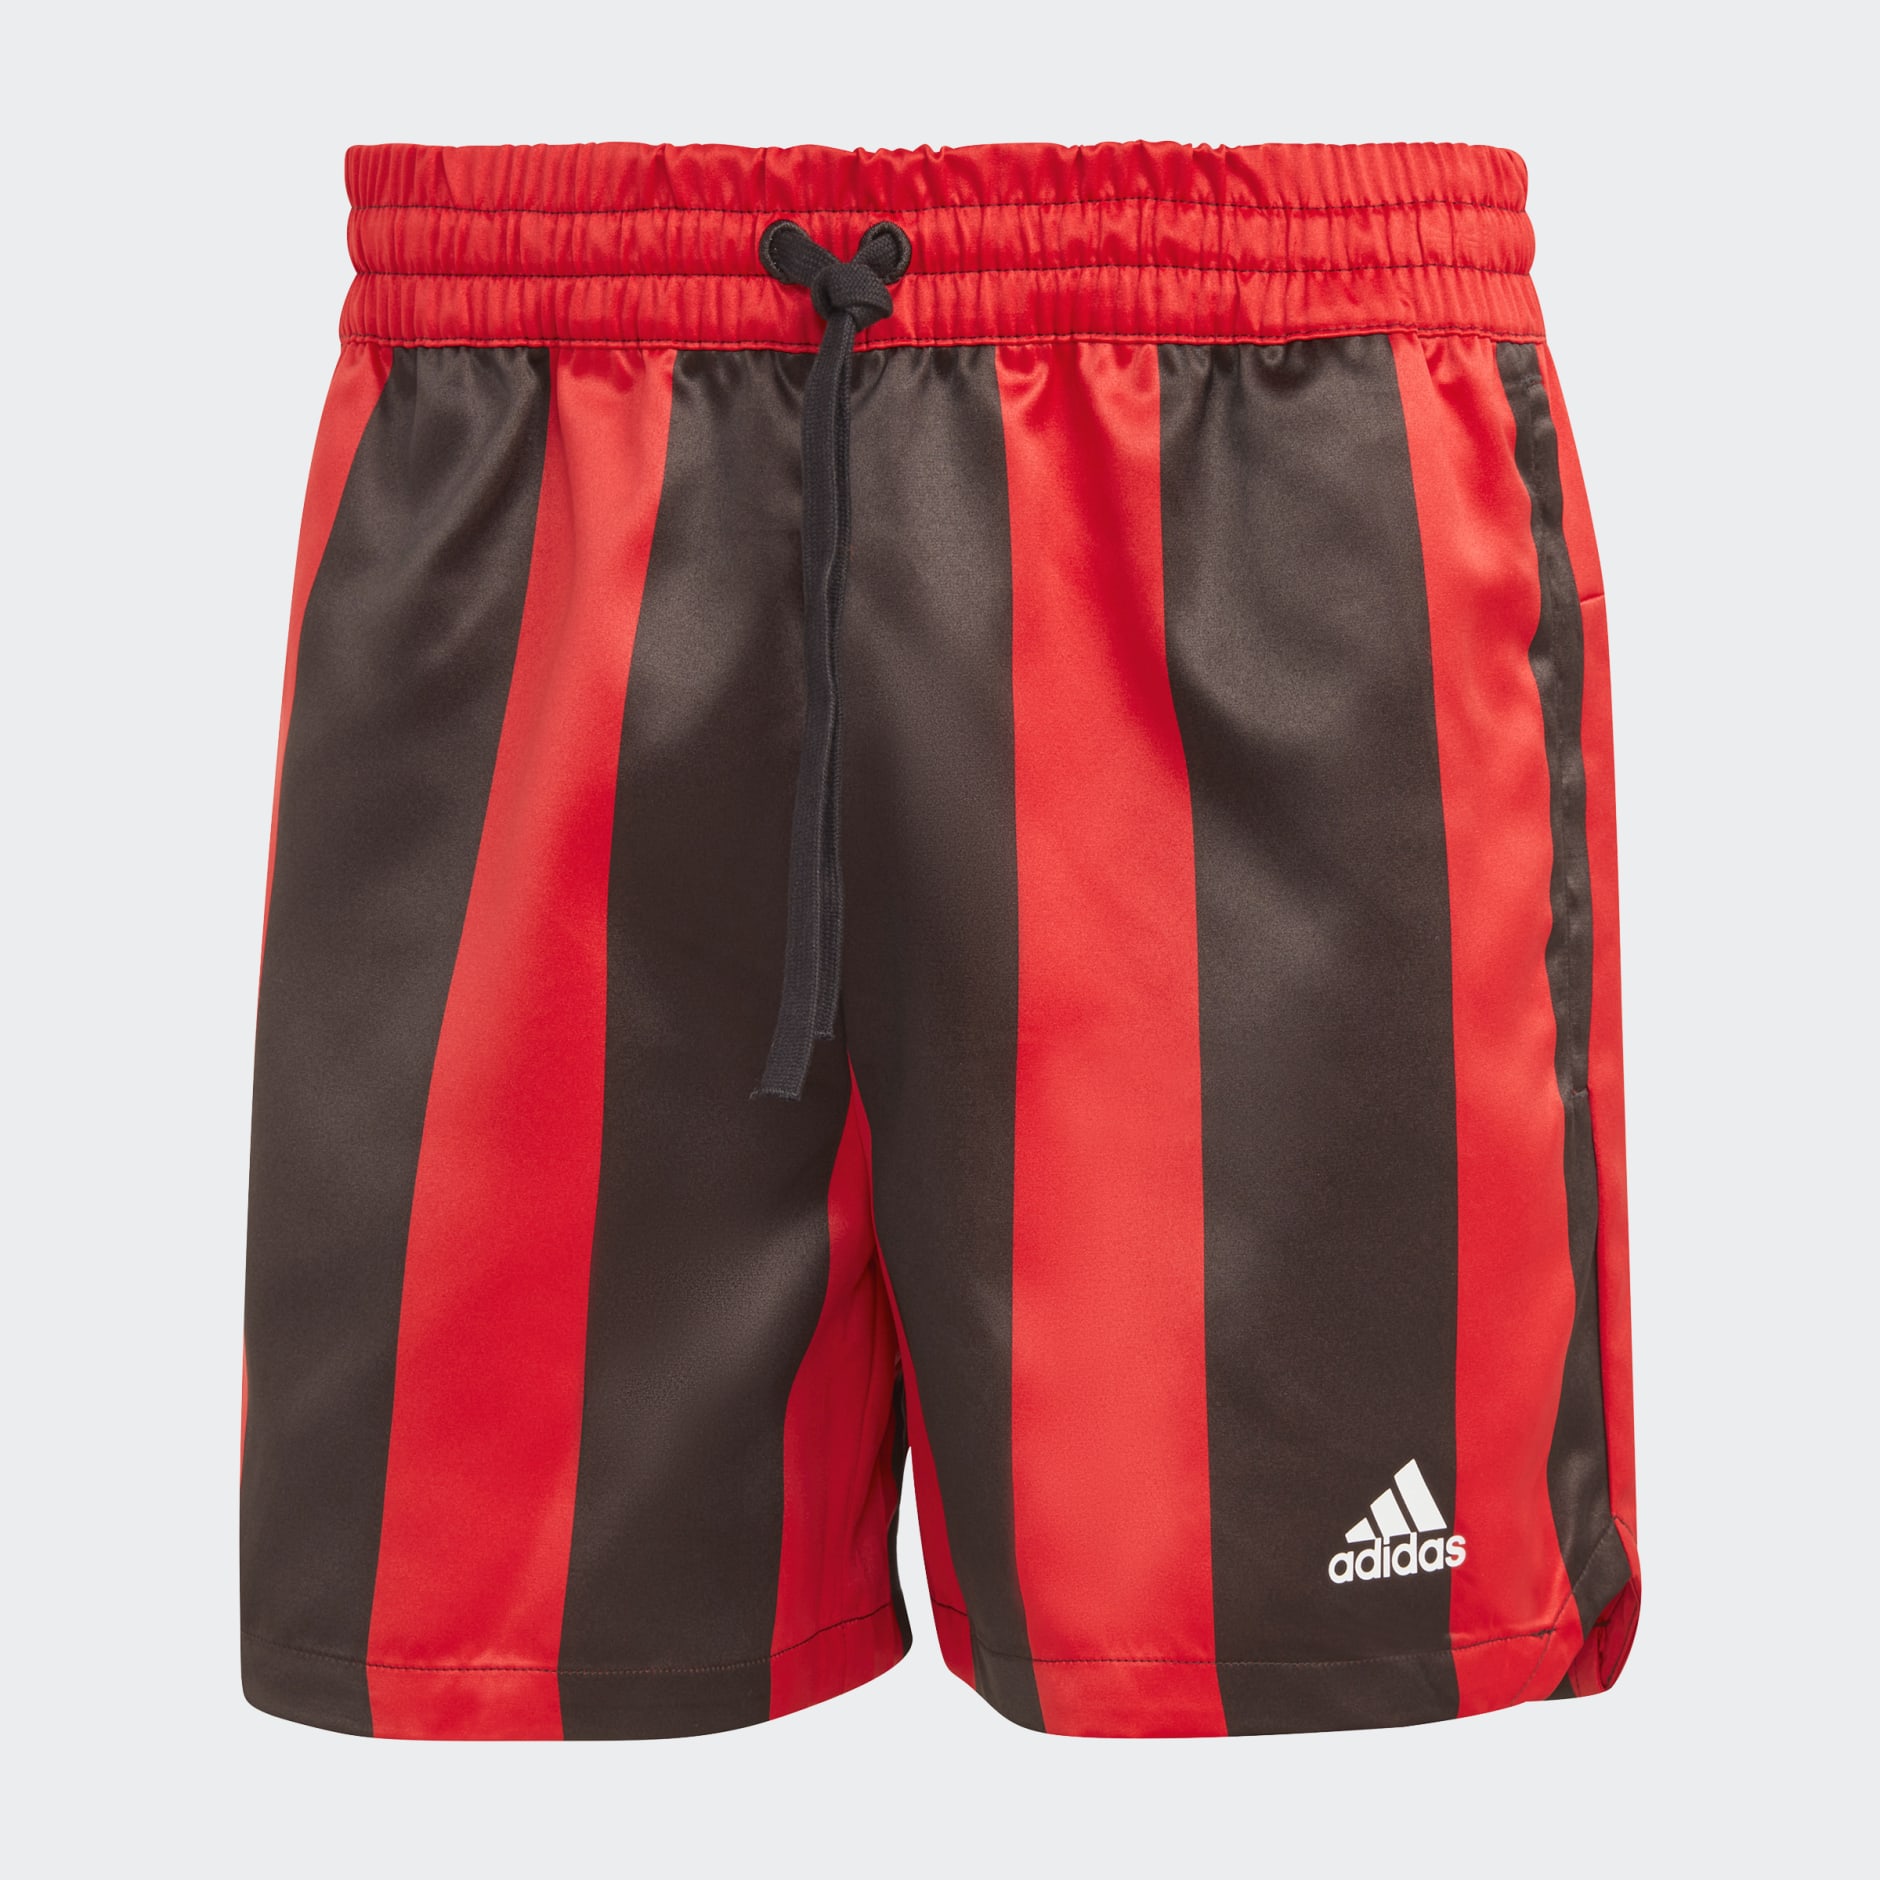 Clothing - Satin Shorts - Red | adidas South Africa